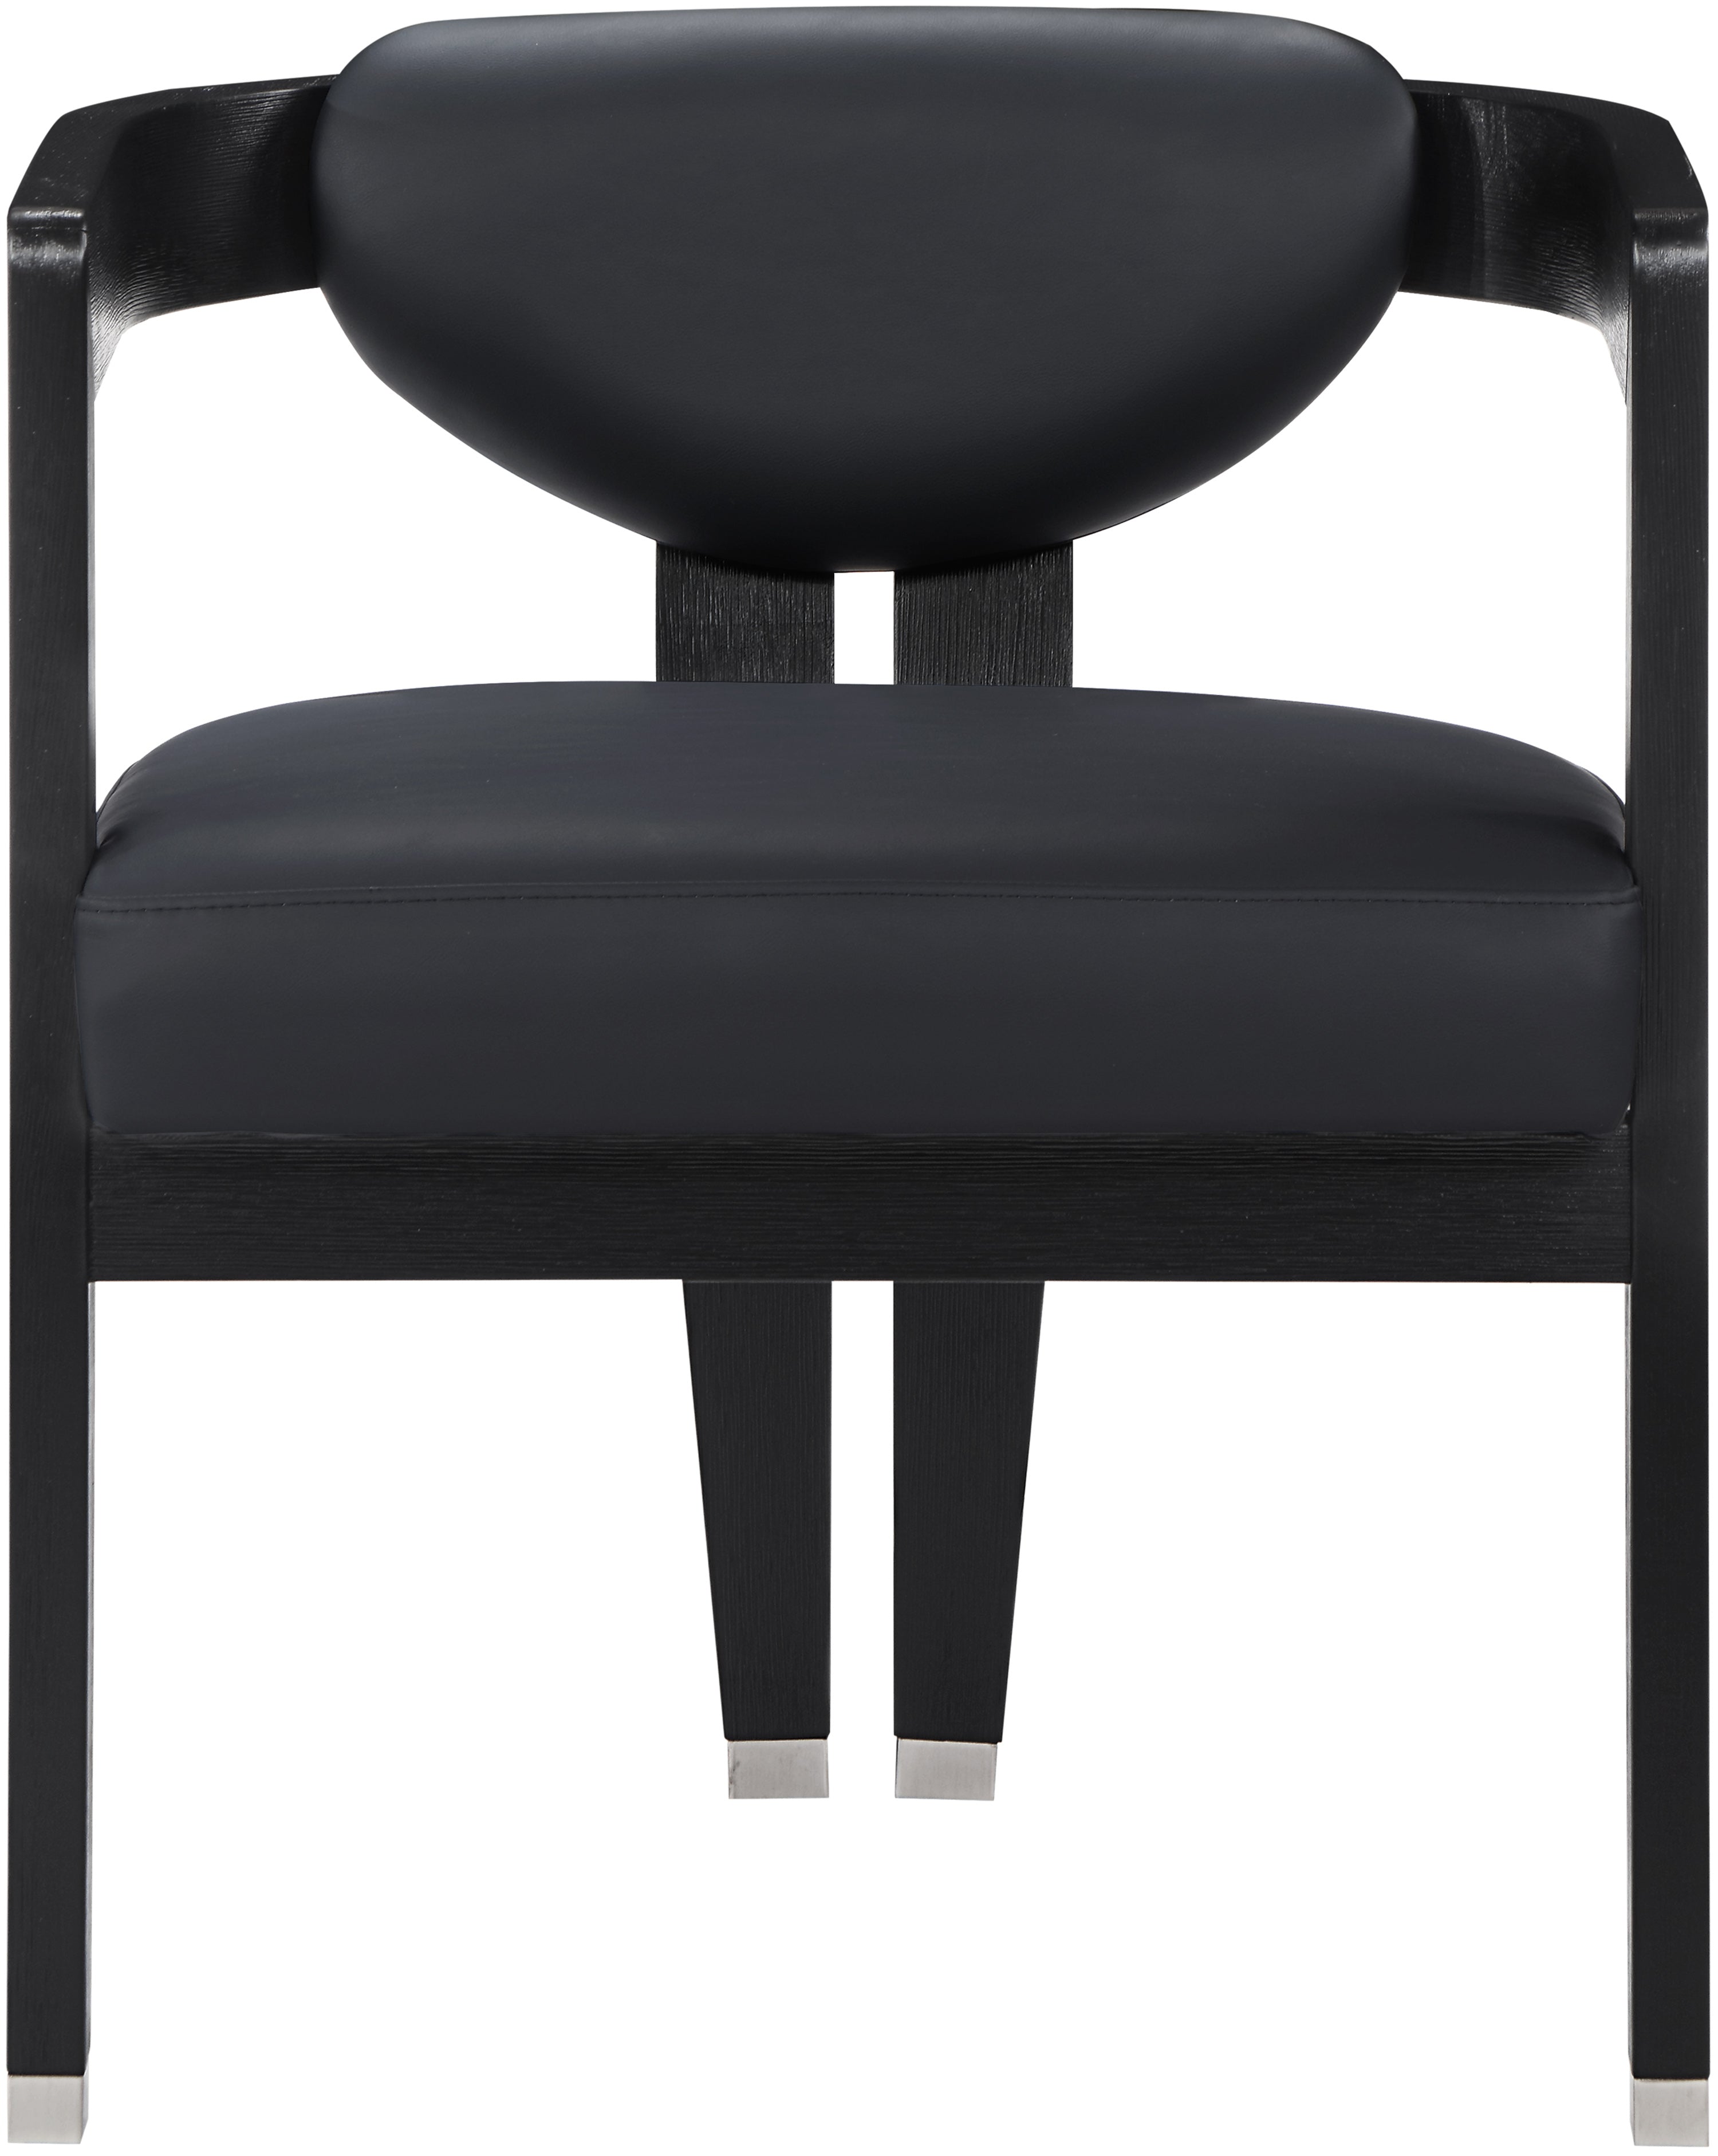 Carlyle Faux Leather Dining Chair - Black/Black